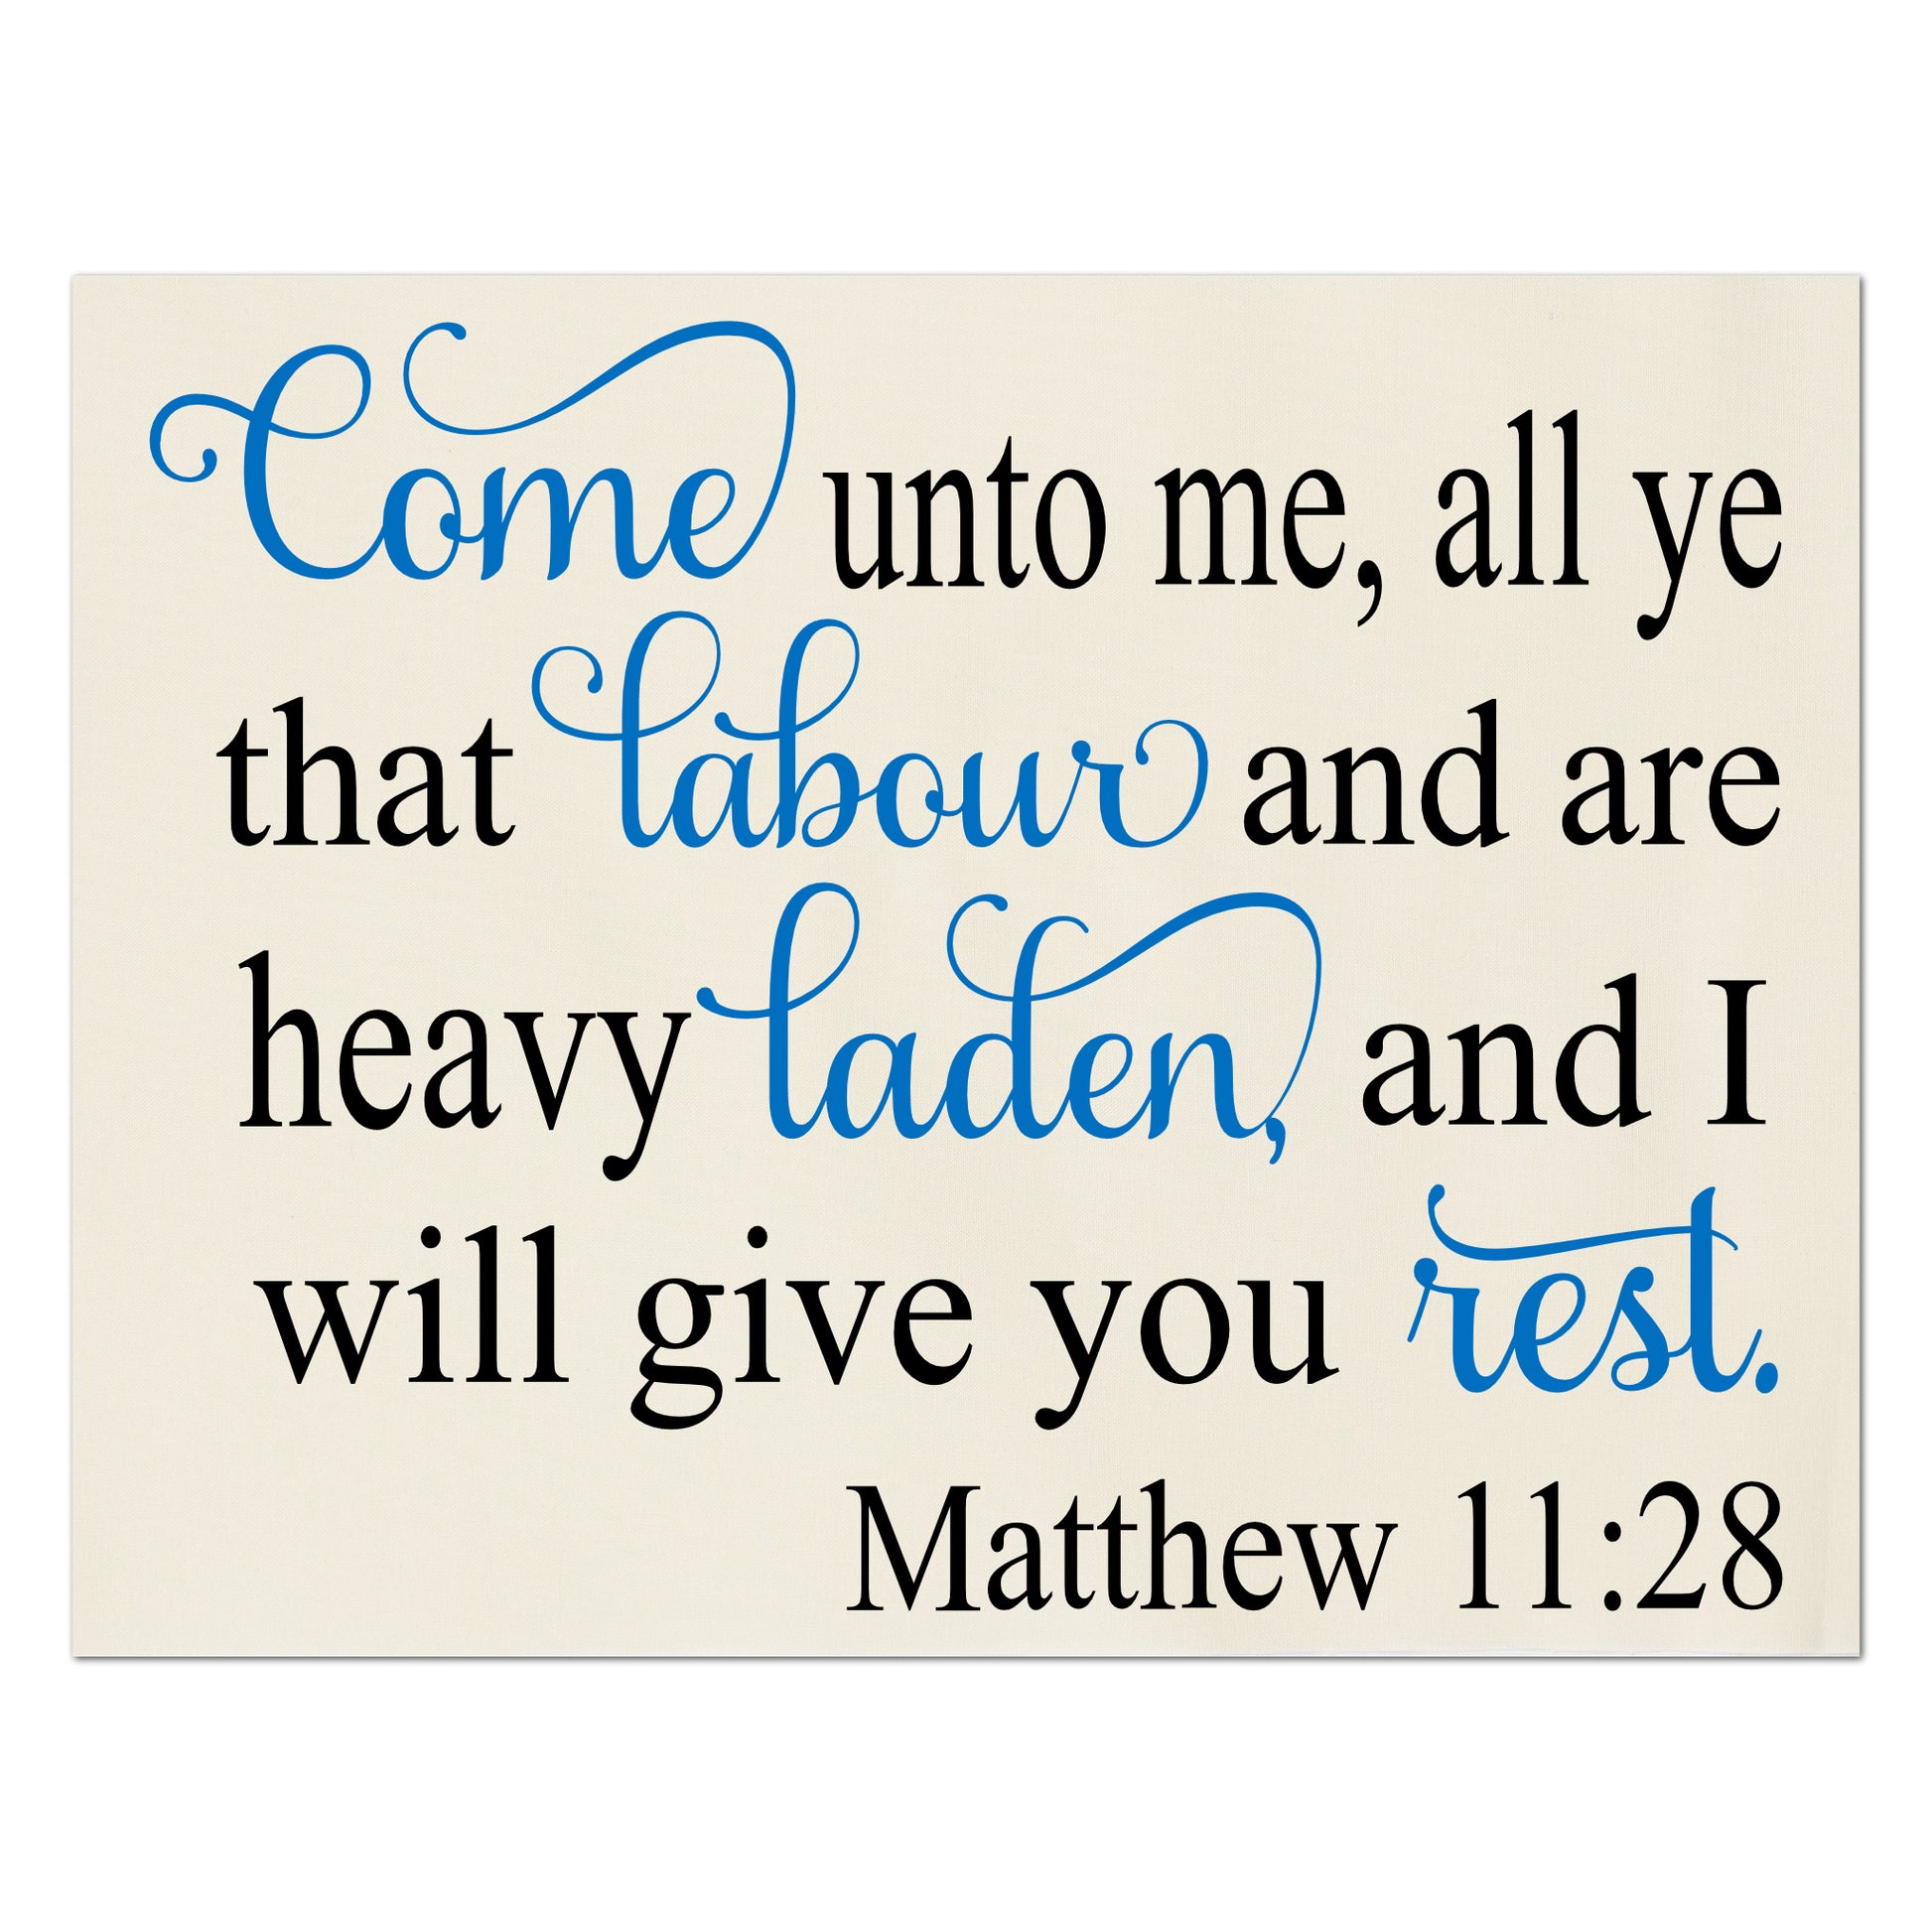 Come unto me, all ye that labor and are heavy laden, and I will give you rest - Matthew 11:28 - Fabric Panel Print, Quilt Block, Wall Art